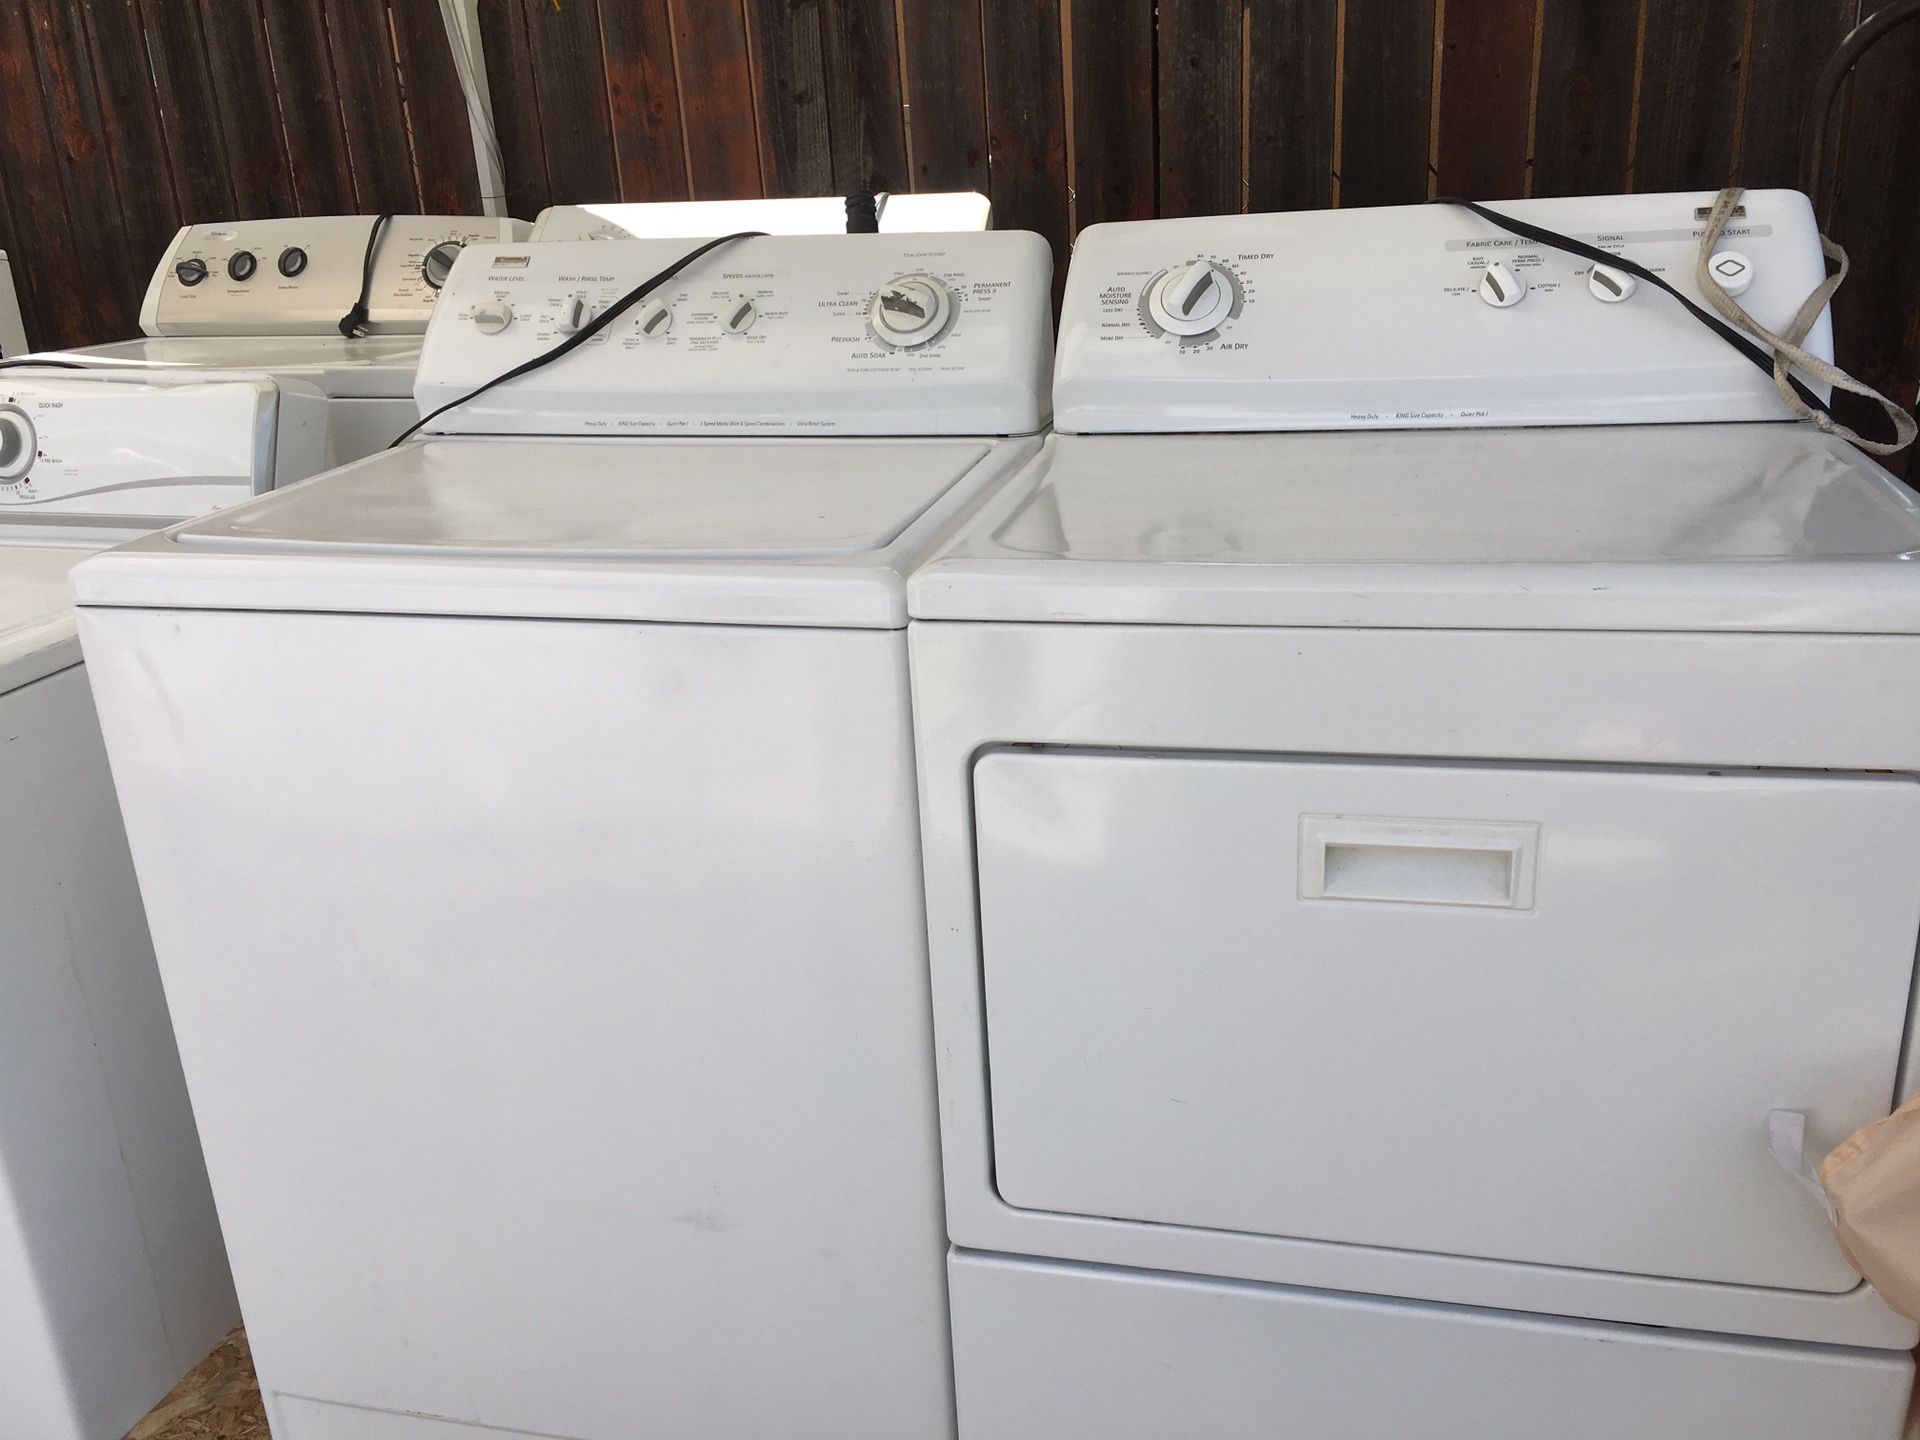 Set washer and dryer good condition brand kenmore 3 mouths of guarantee